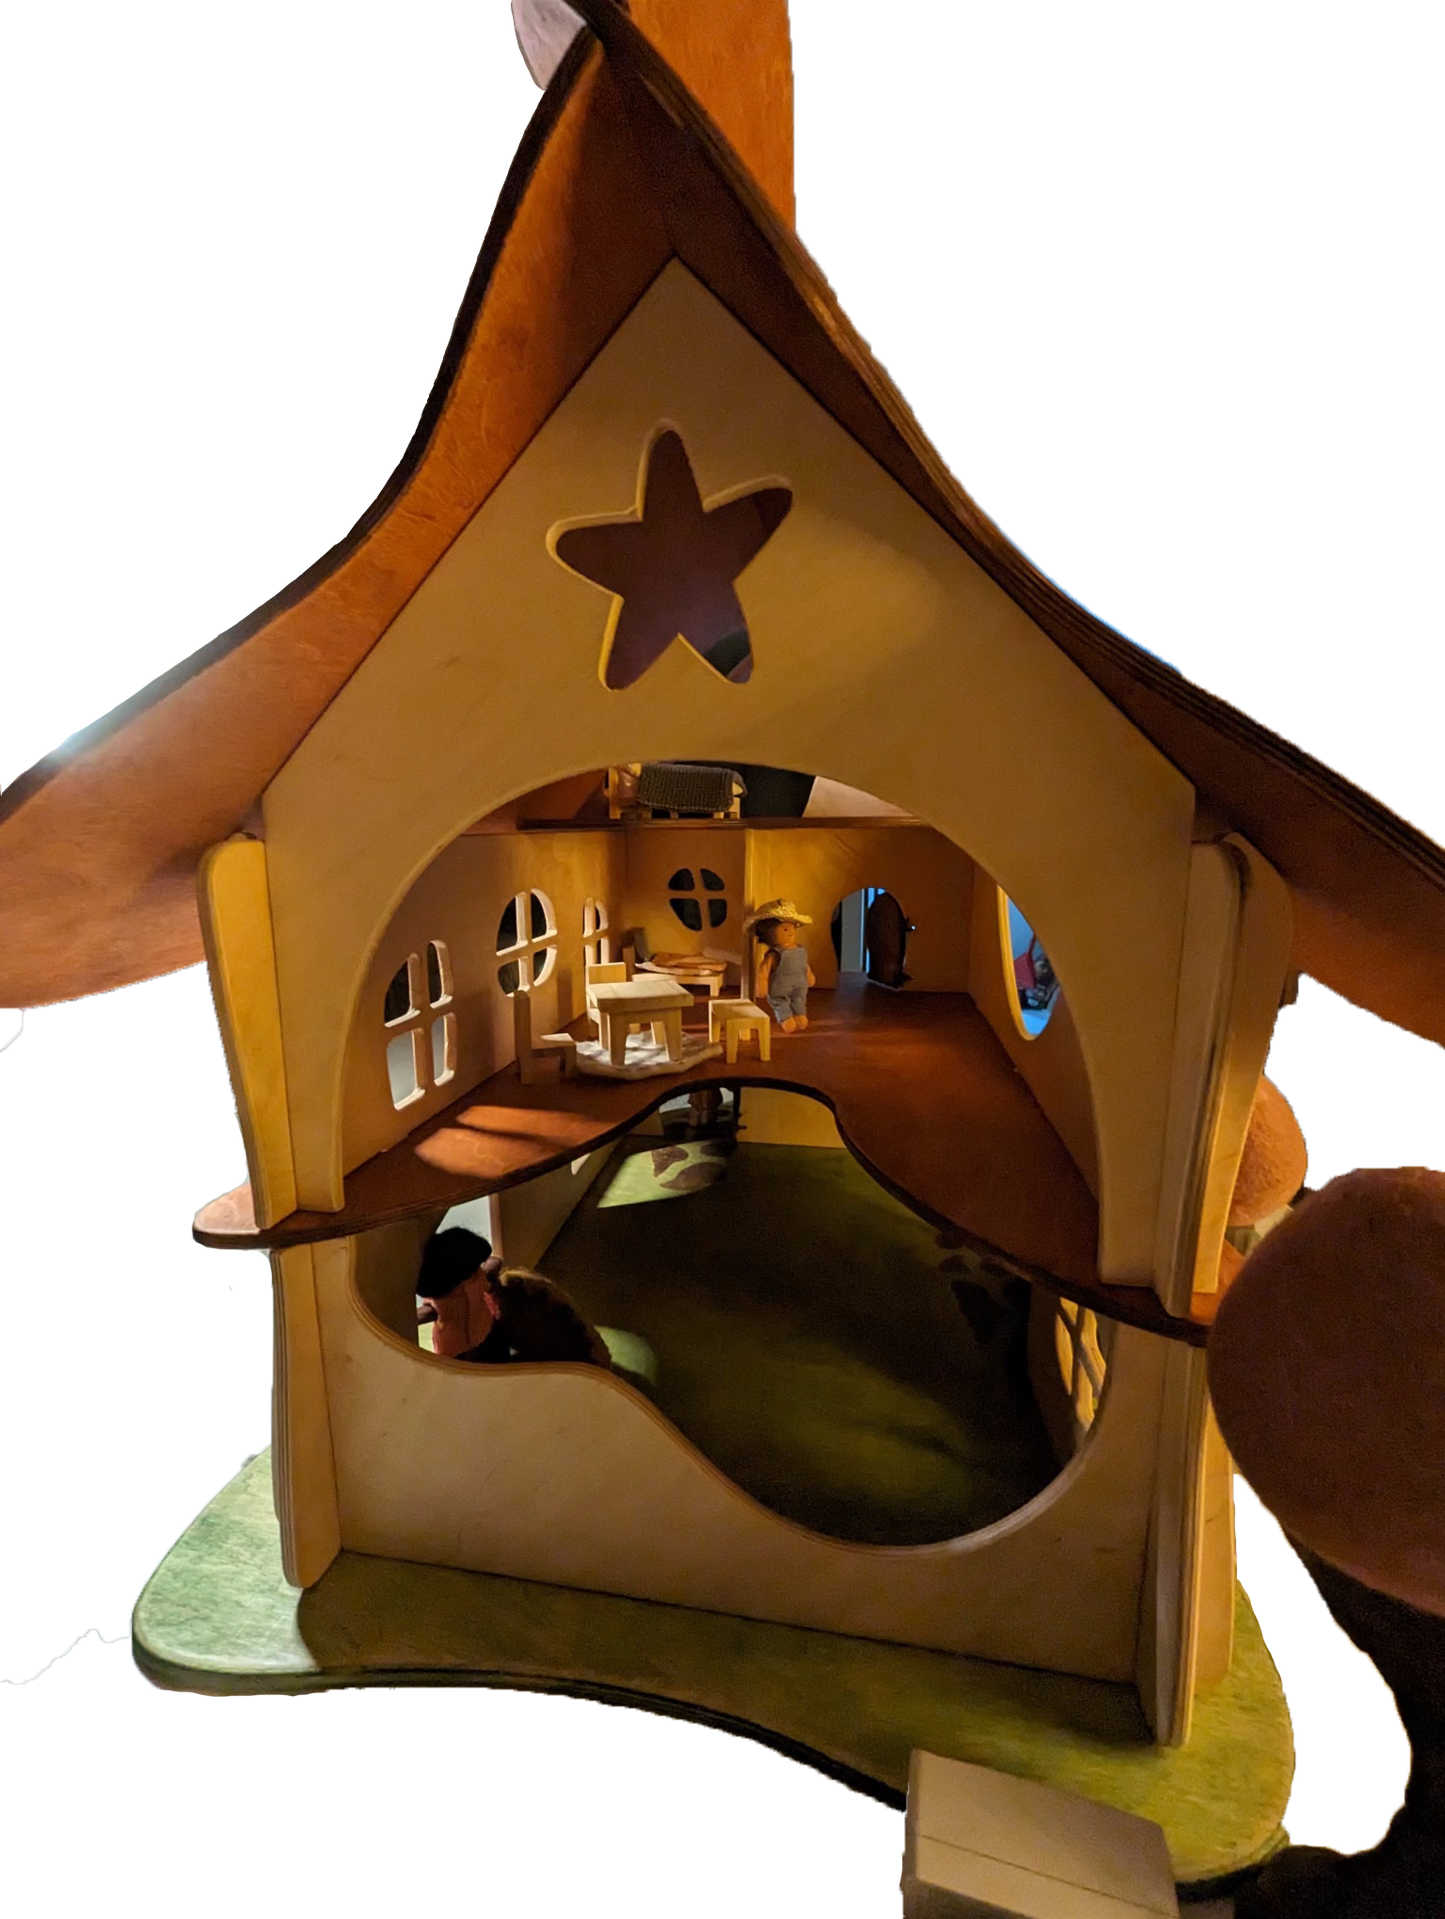 Montessori Toy Wooden Dollhouse Large Size by Twig Studio - Perfect for Imaginative Play!